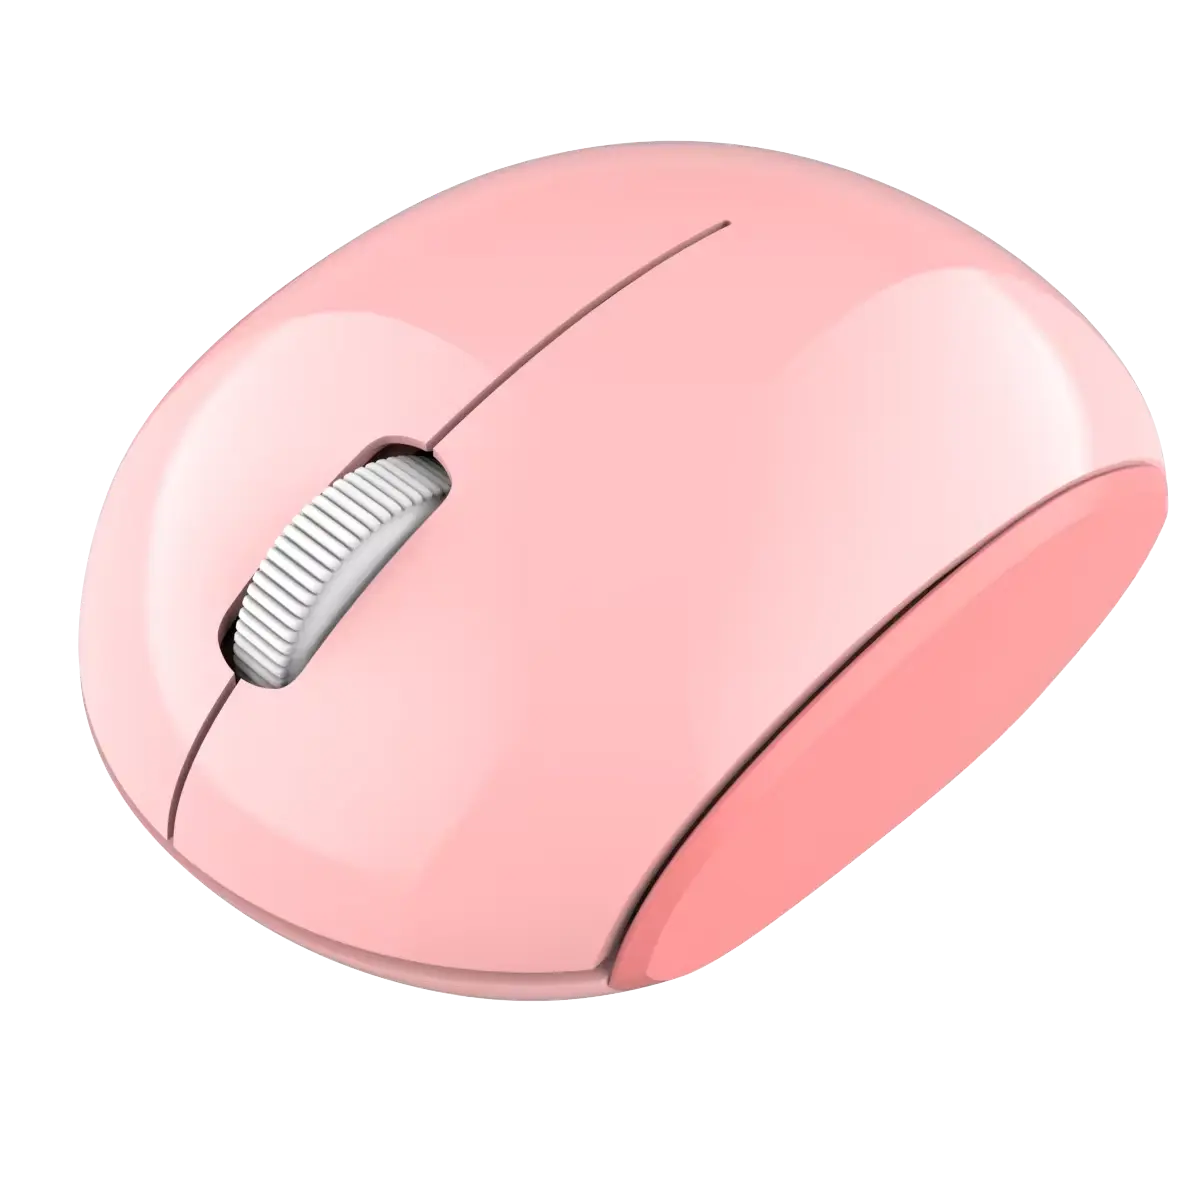 Wireless mouse various colours suitable for gift friends business tablet laptop office